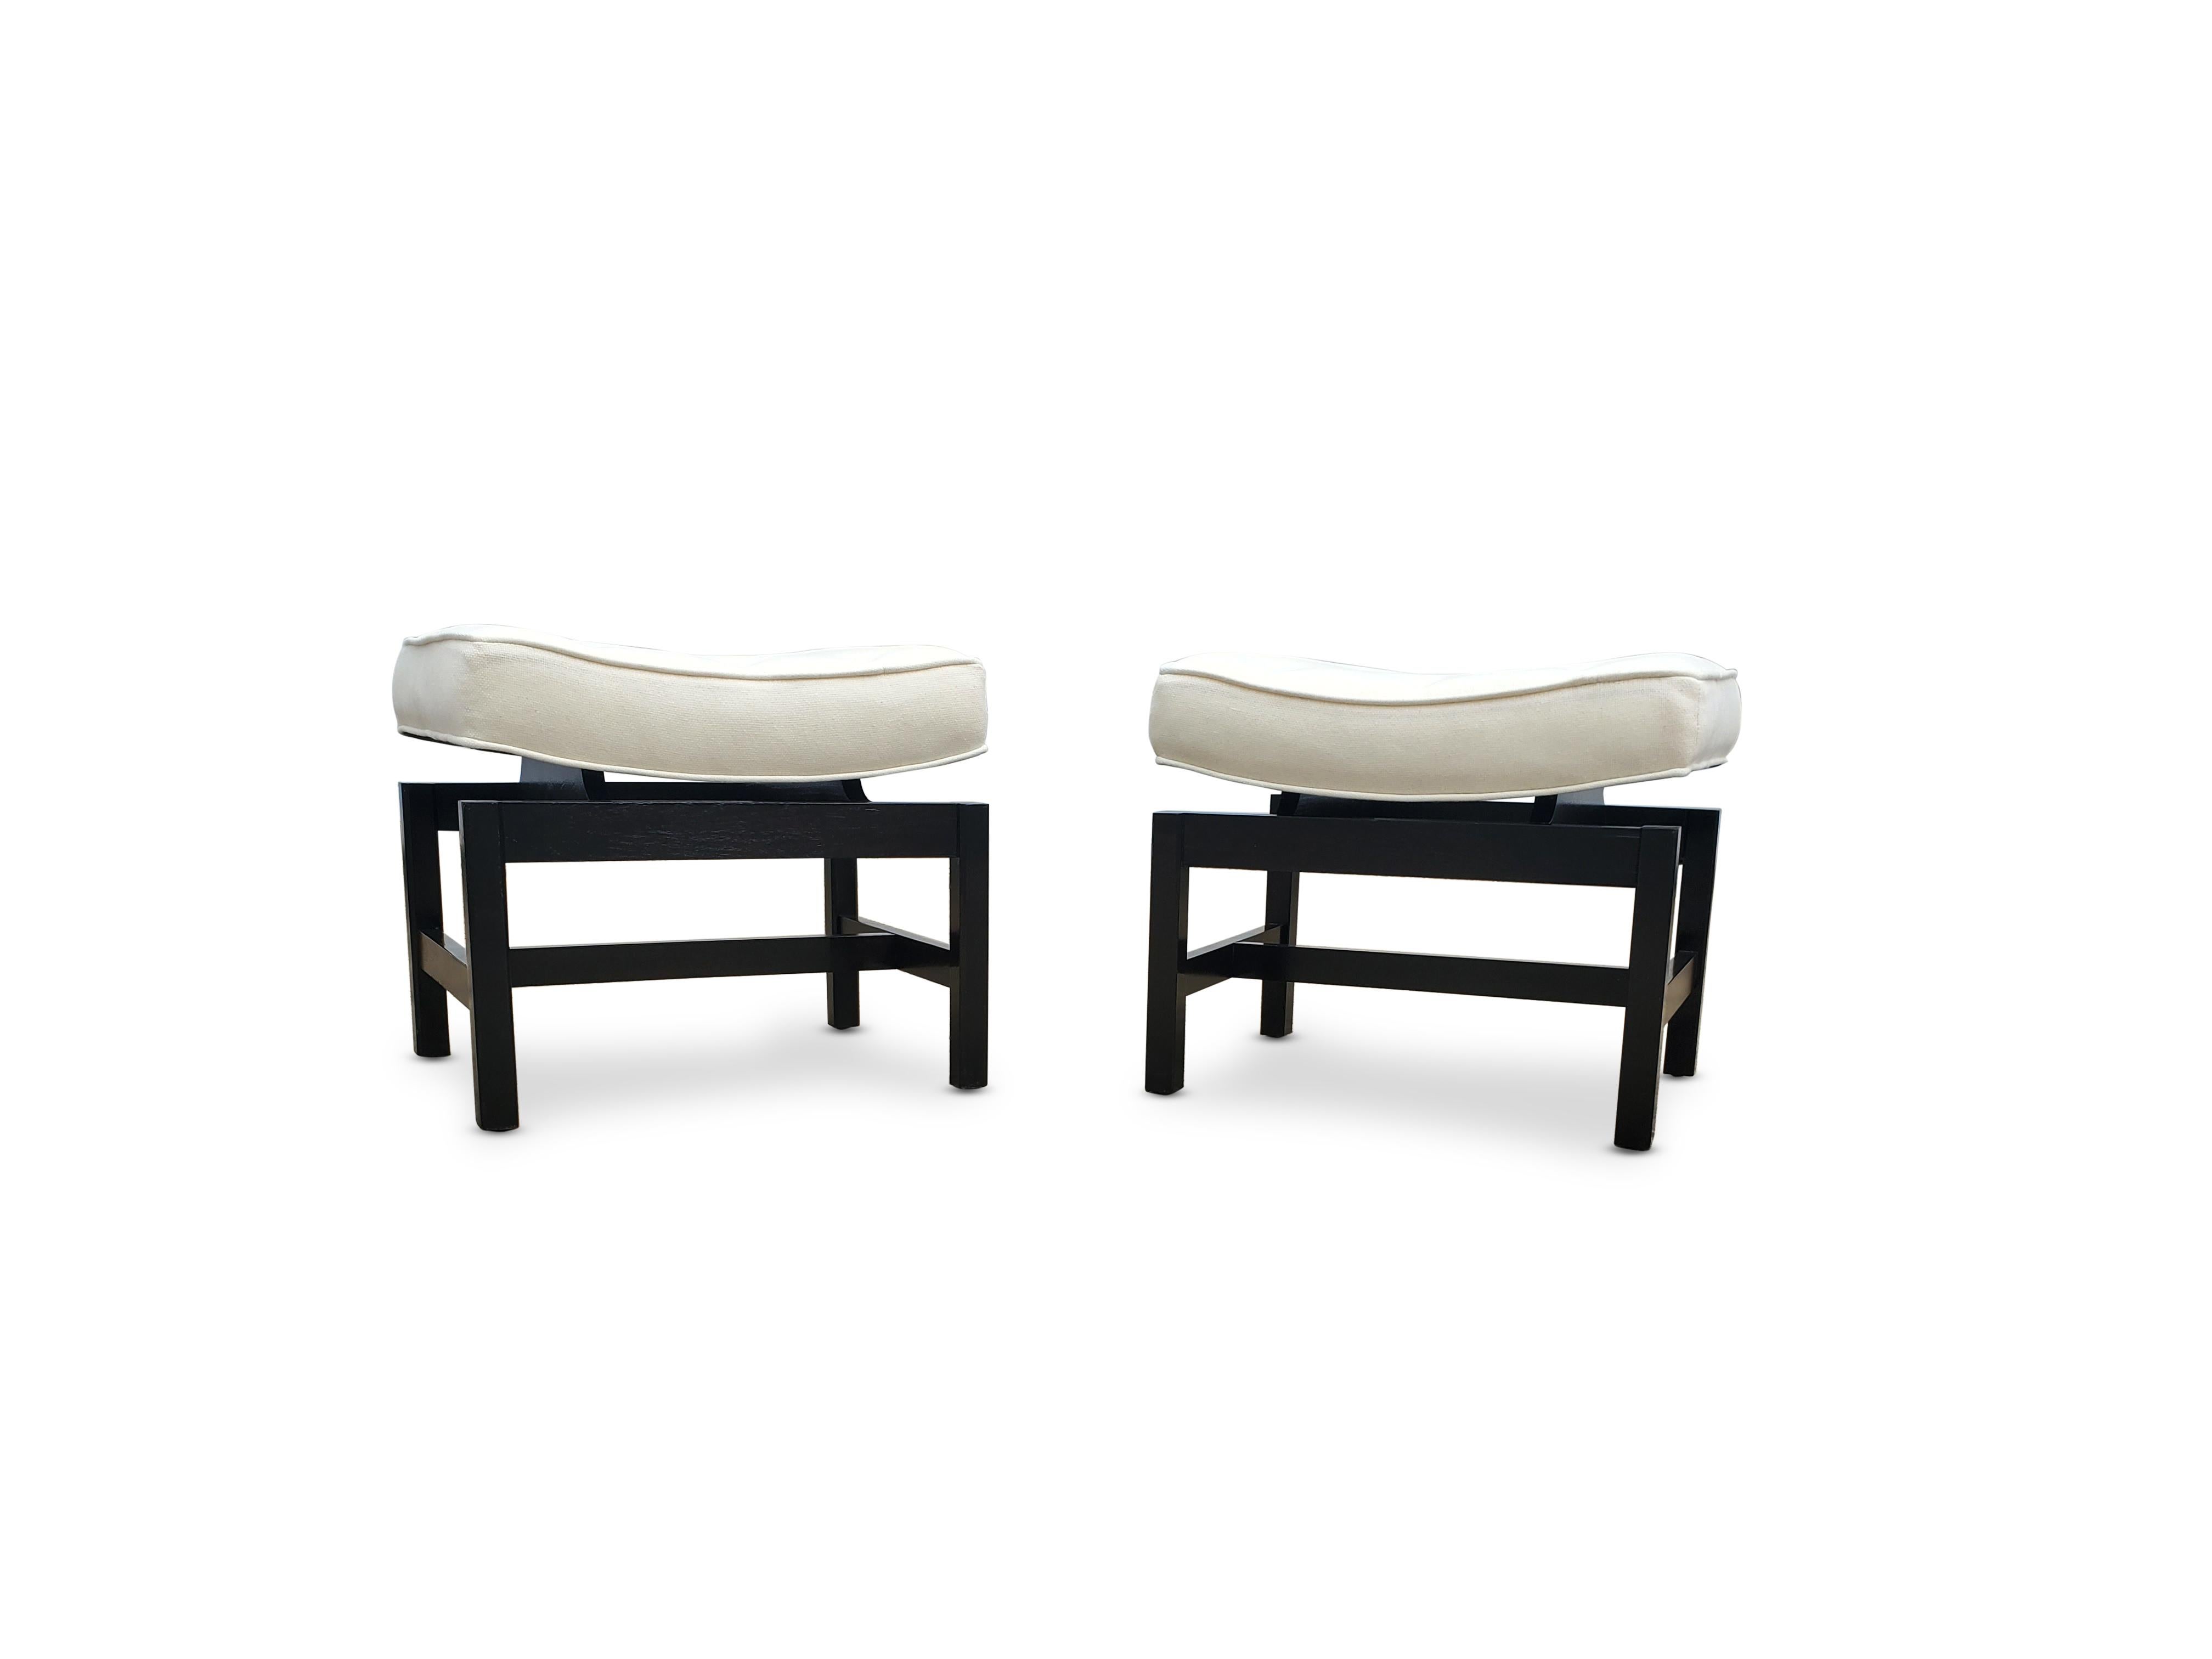 Pair of footstools by Jens Risom.